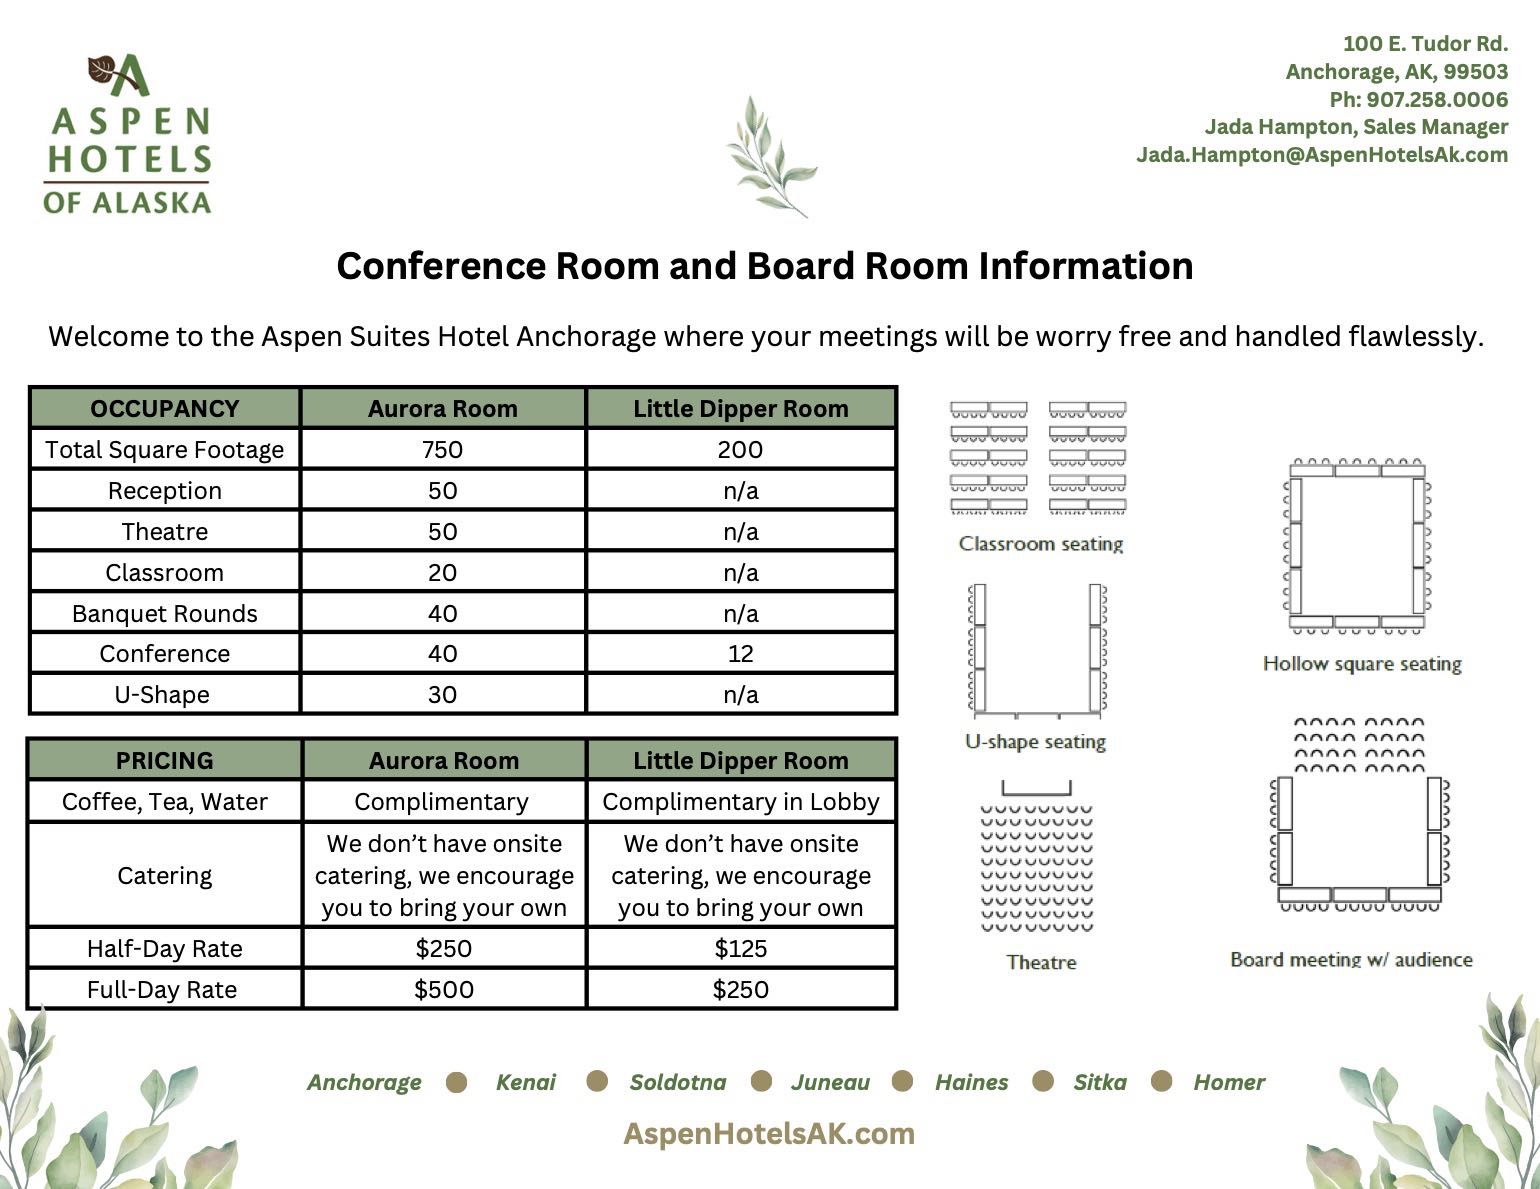 Anchorage Meeting Room Information